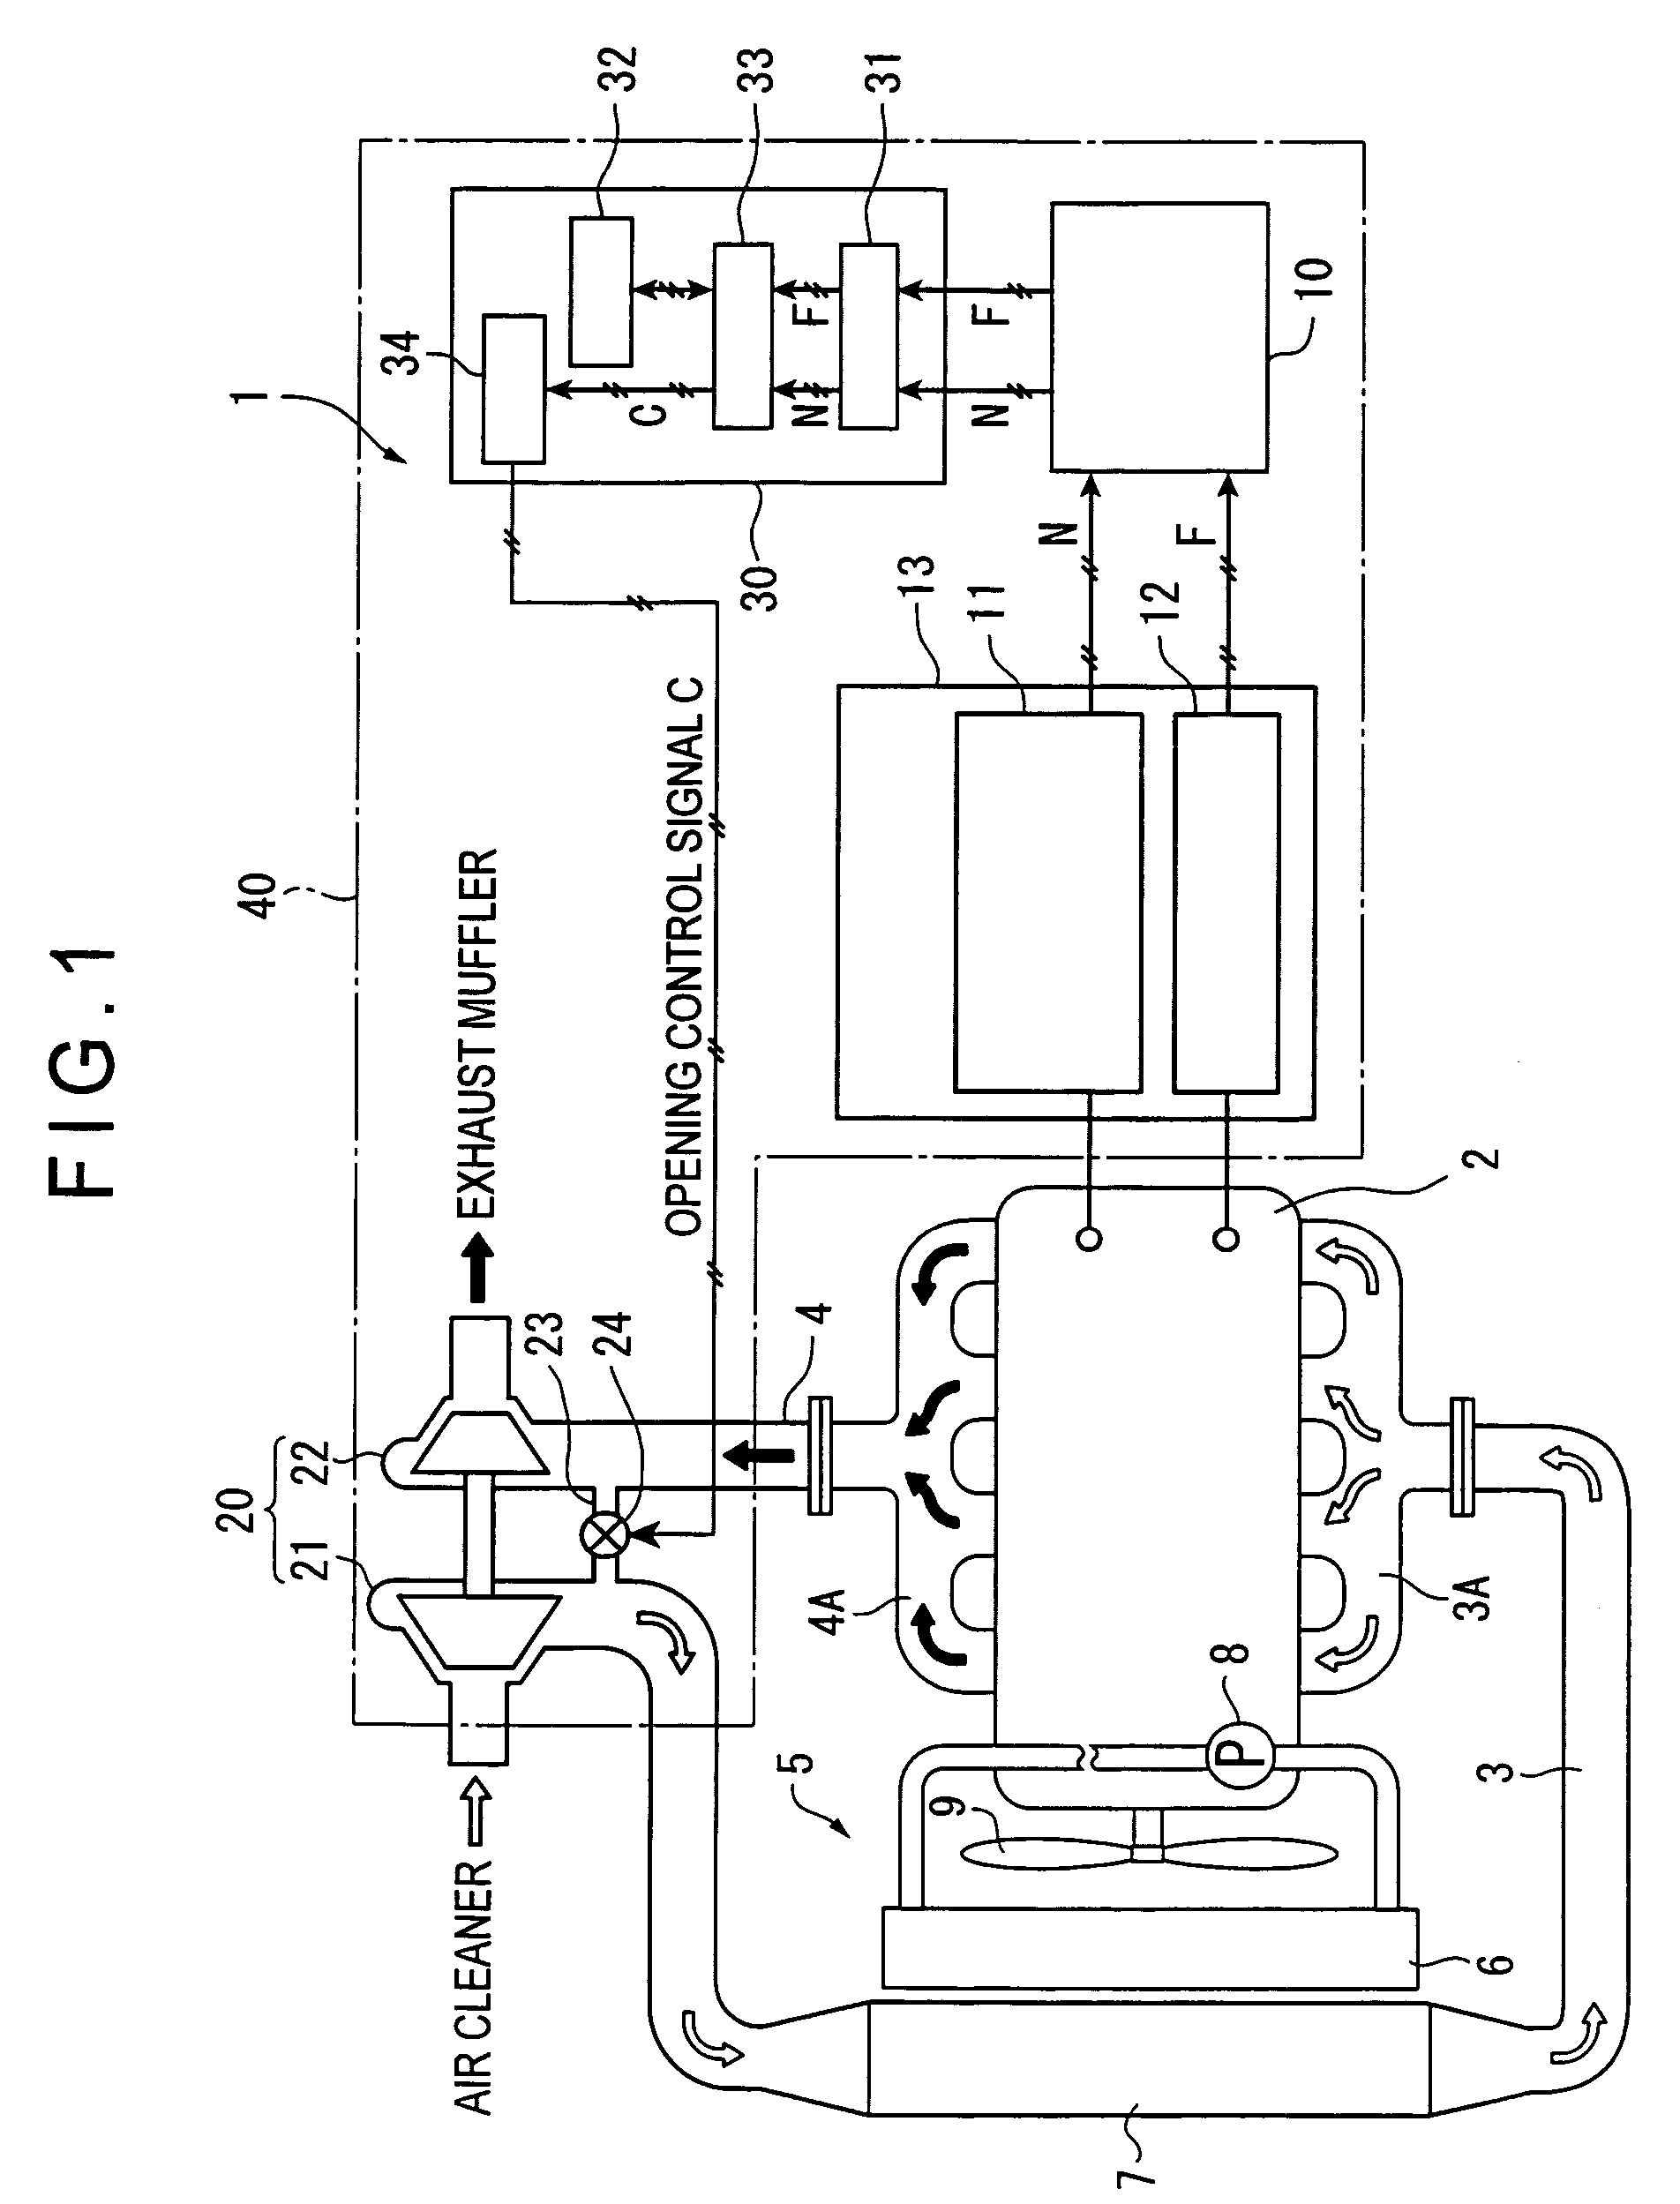 Internal combustion engine provided with intake bypass control device